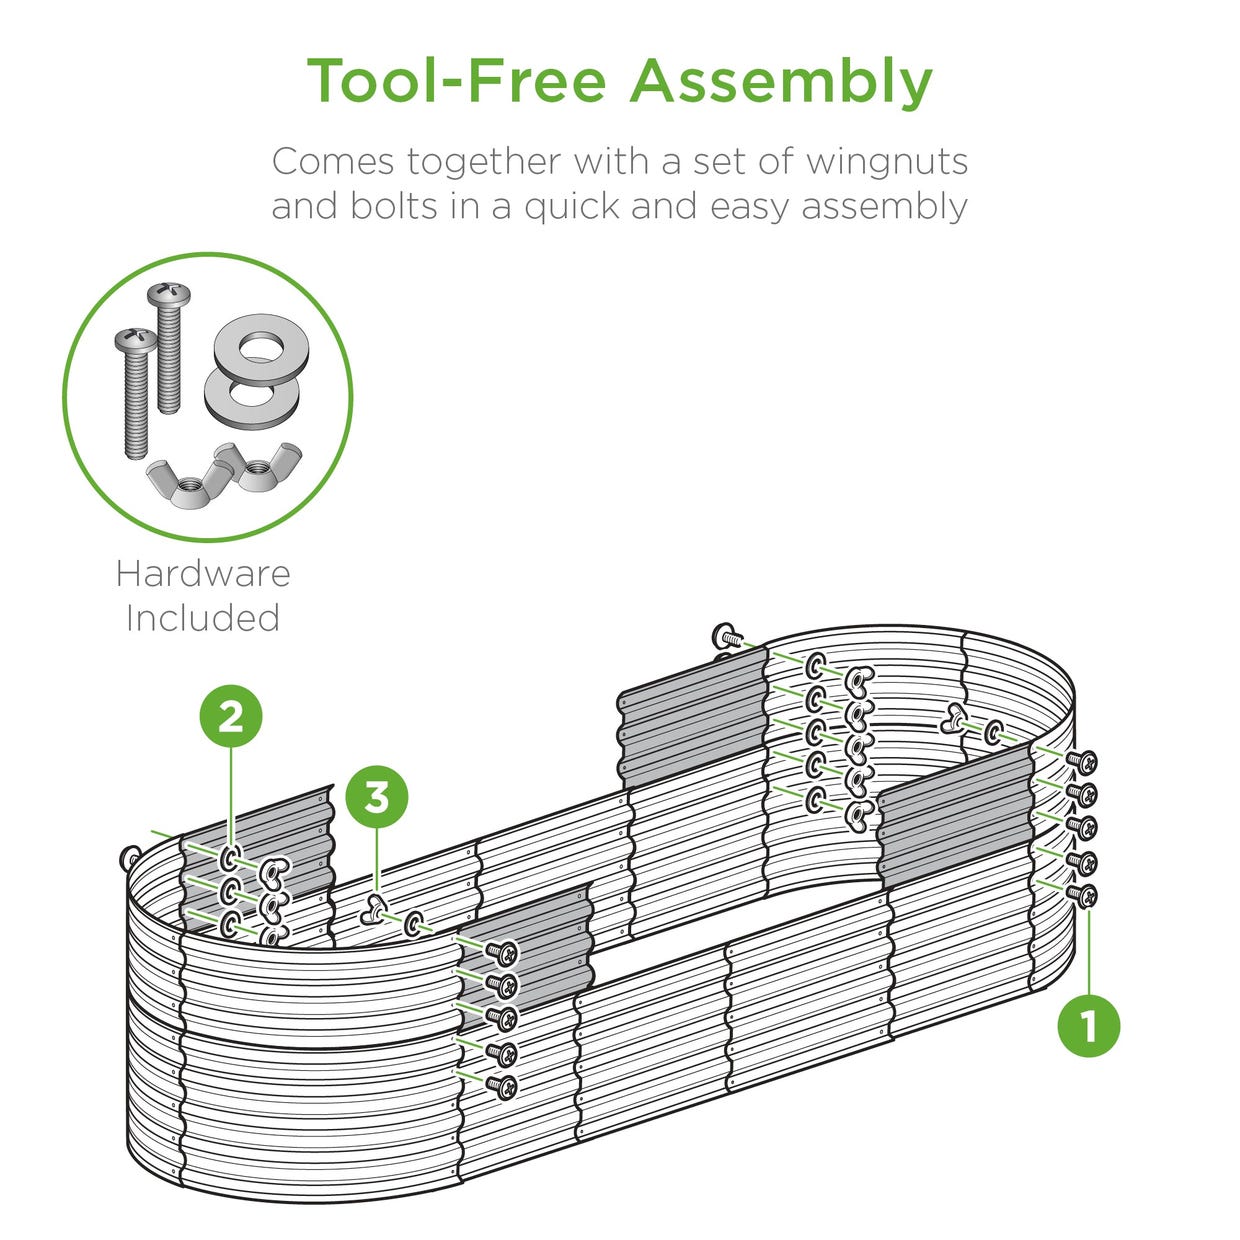 An illustration of an oval-shaped garden bed featuring a tool-free assembly with included hardware such as wingnuts and bolts.